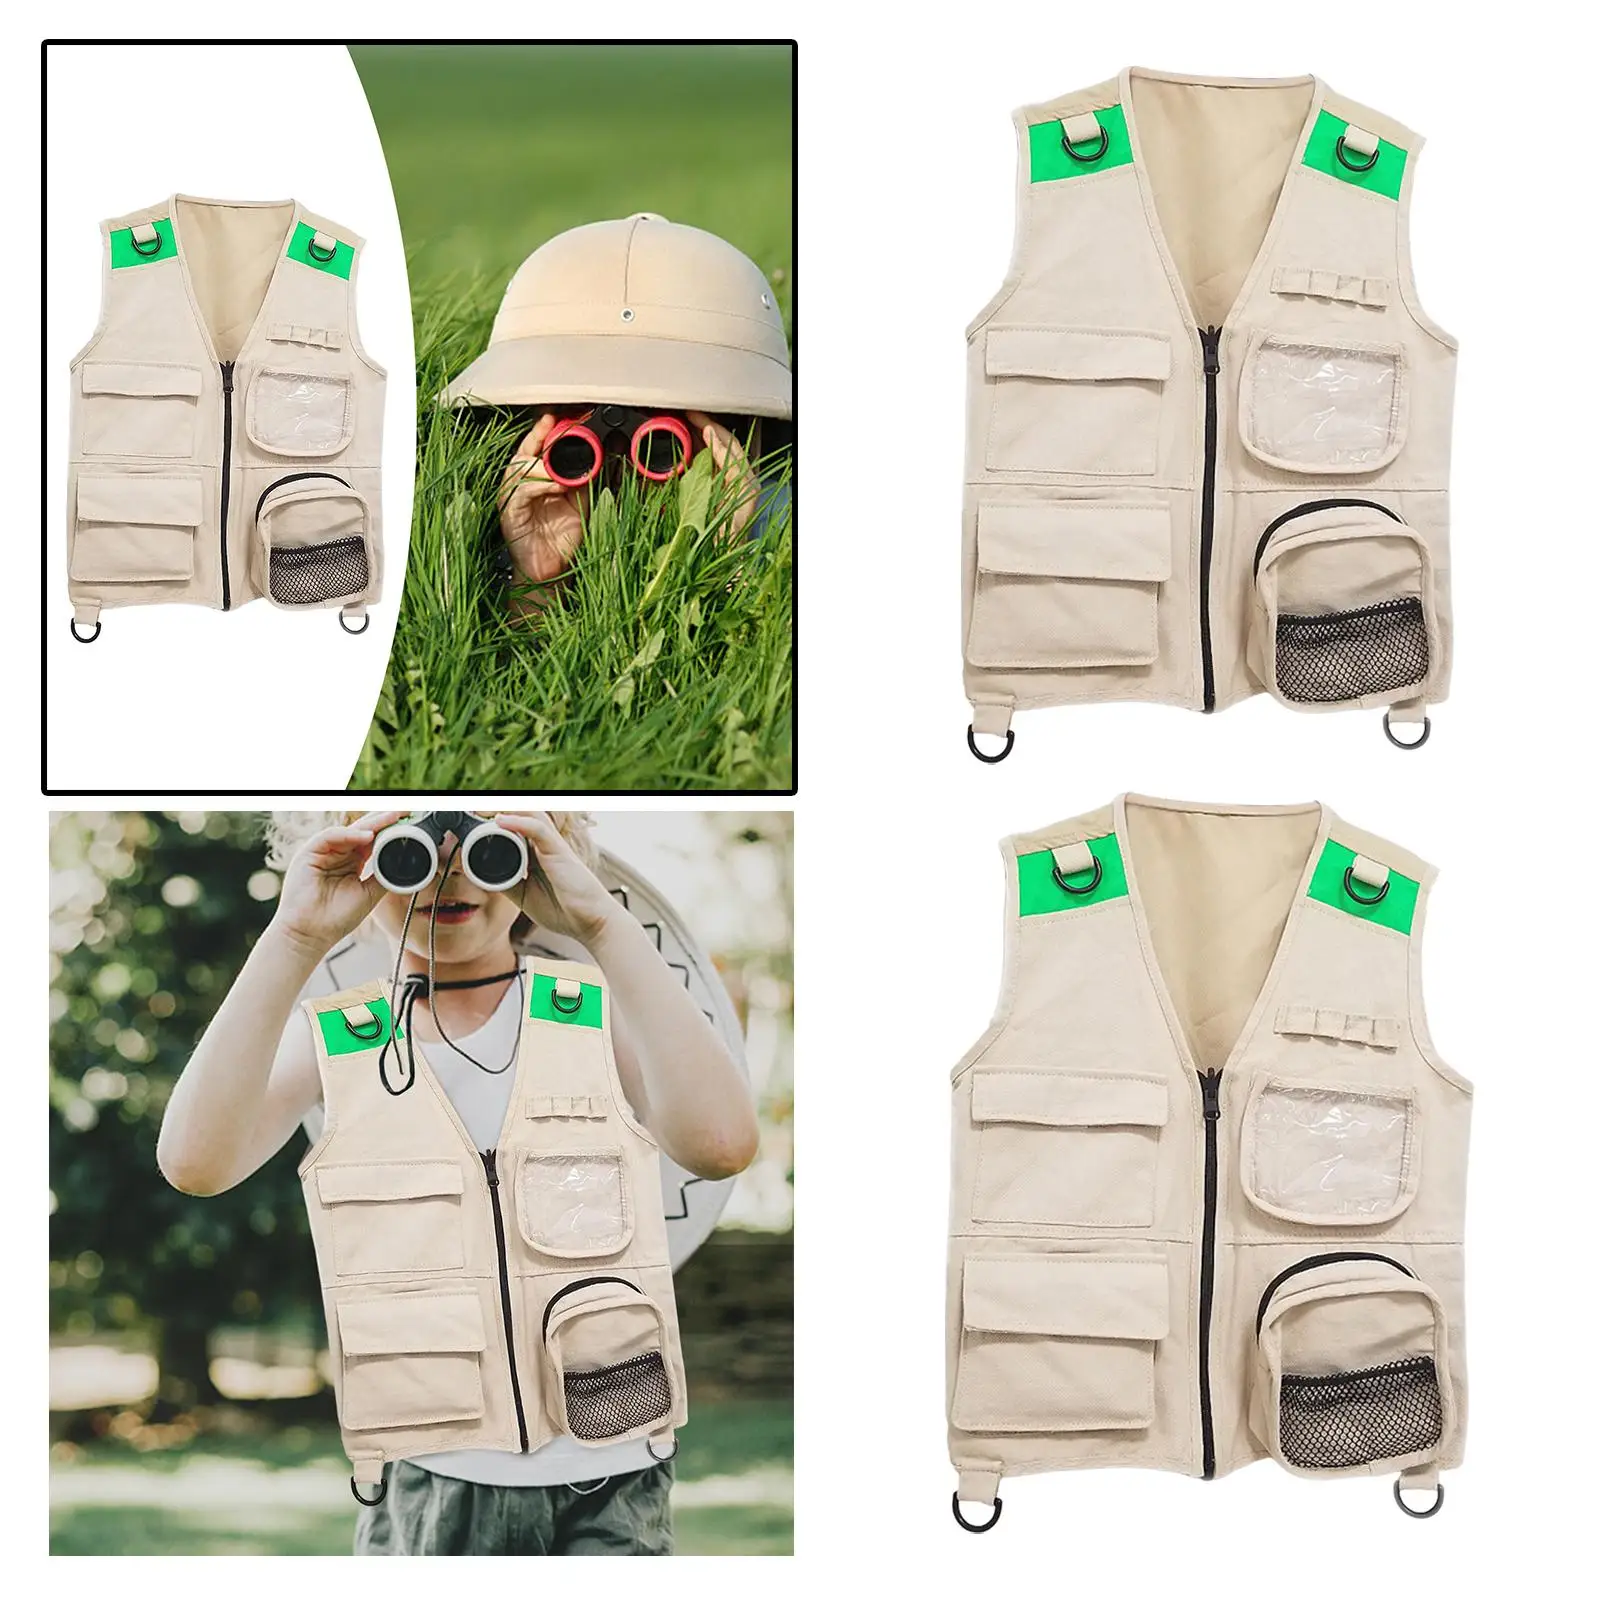 Kids Costume Vest Pretend Play Dress Up for Birthday Gift Zoo Keeper